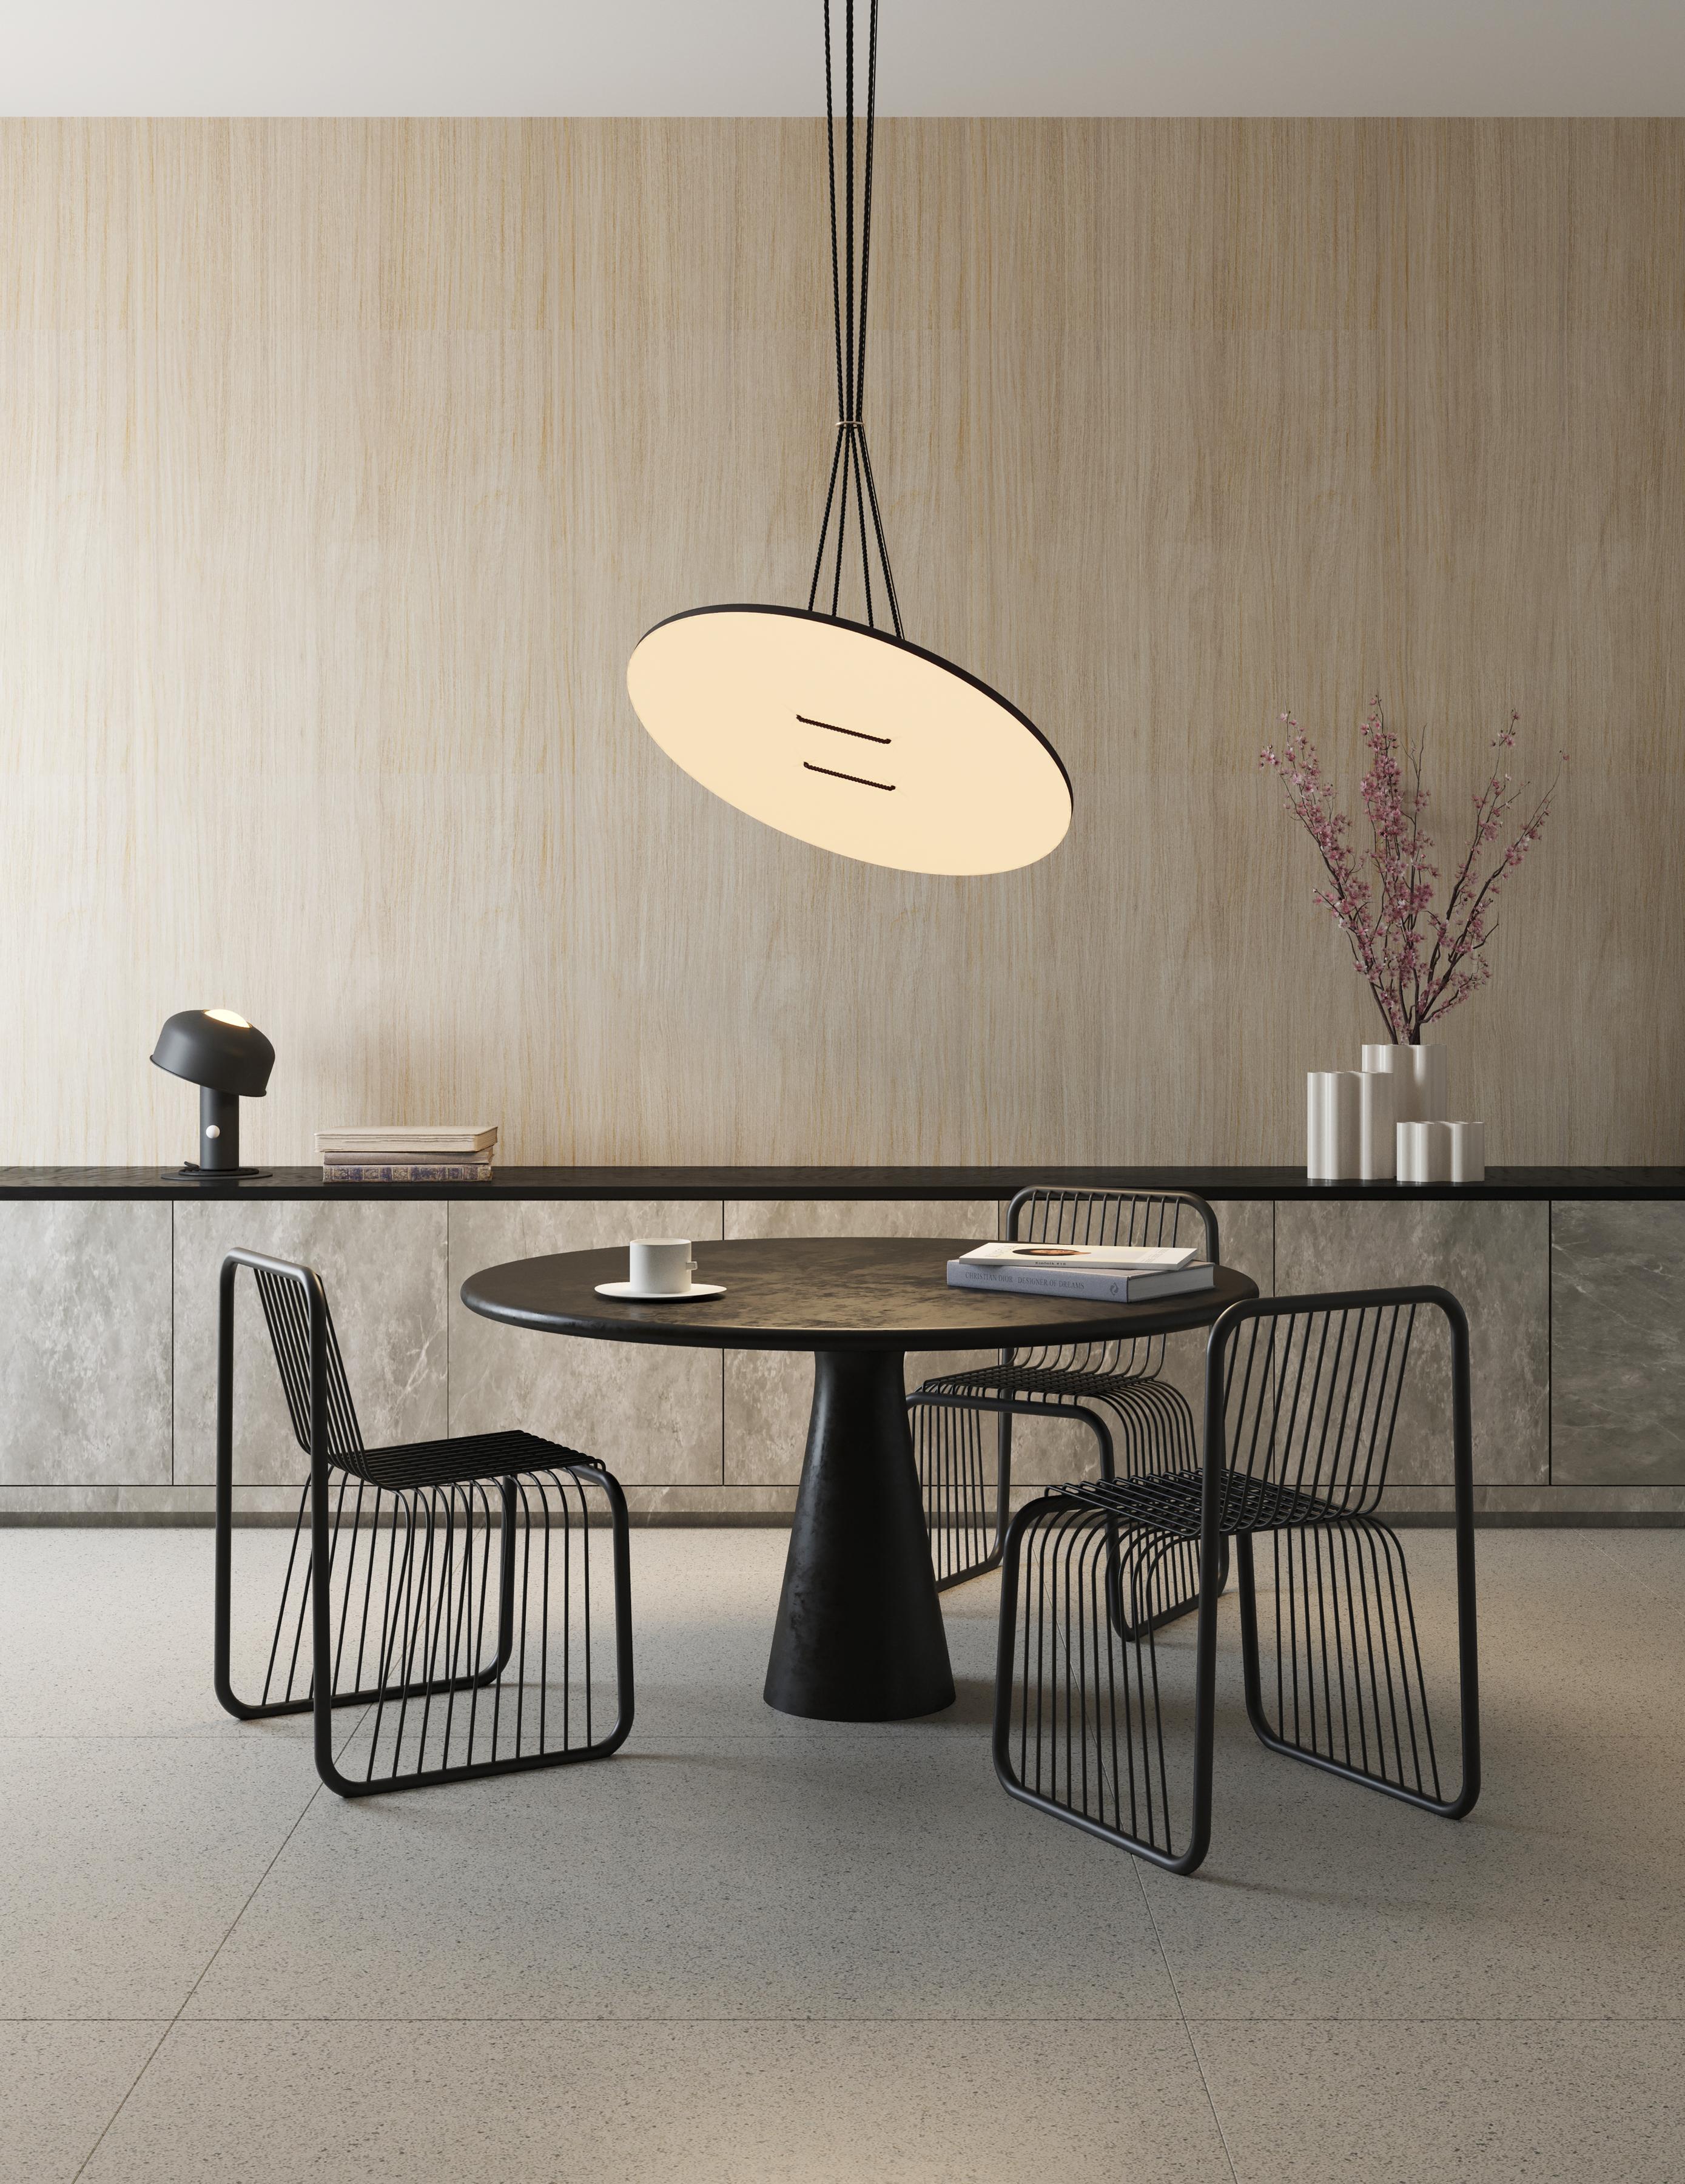 Contemporary pendant lamp 'button'
by ANDlight

ELECTRICAL
– 35W LED Panel
– 50,000 hour Lifetime
– 90+ CRI
– Input Voltage: 120V, 230V + 277V
– Integral 12V DC

The model shown in picture:
- Diameter: 90 cm Height: 2.5 cm 
- Finish: